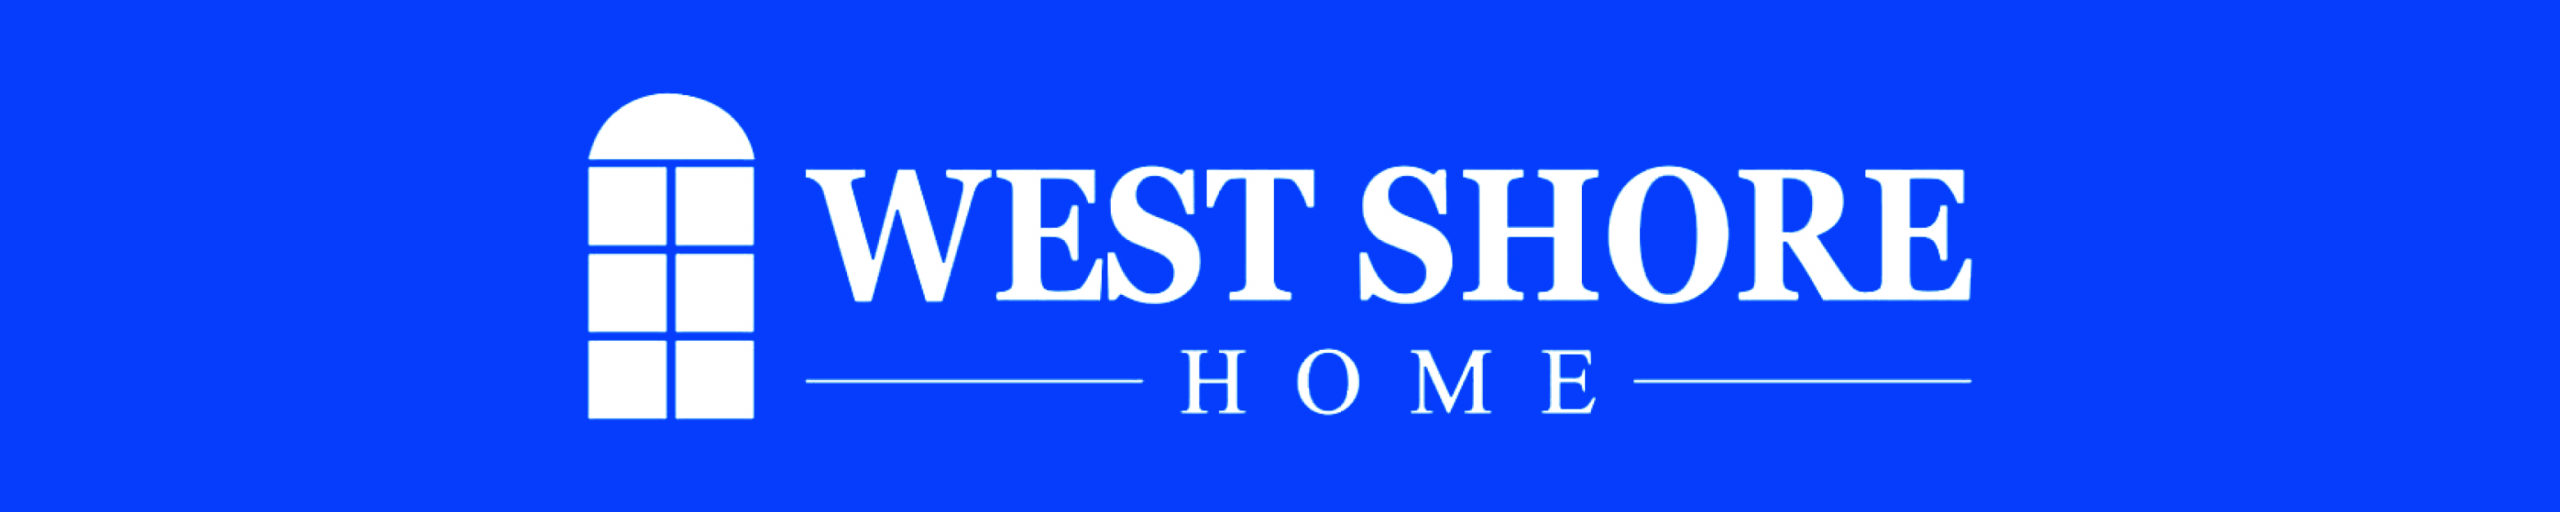 West Shore Home web ad (Formerly Hullco)